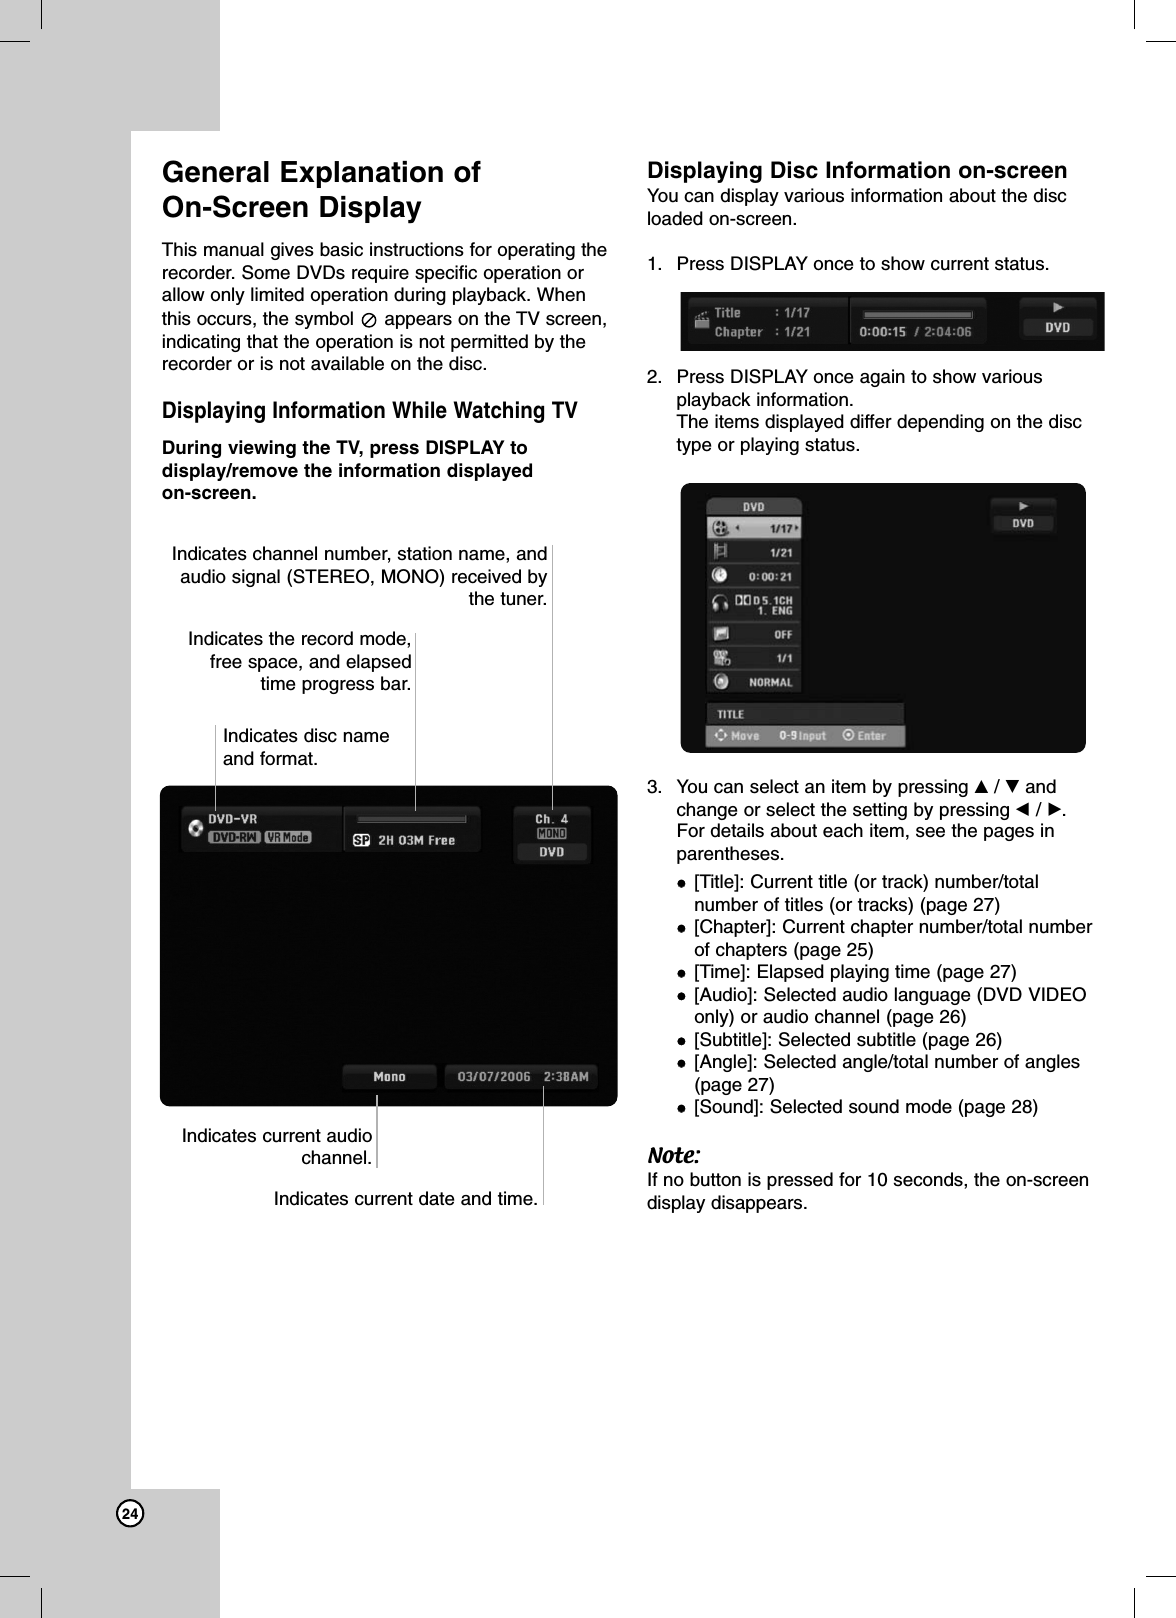 24General Explanation of On-Screen DisplayThis manual gives basic instructions for operating therecorder. Some DVDs require specific operation orallow only limited operation during playback. Whenthis occurs, the symbol  appears on the TV screen,indicating that the operation is not permitted by therecorder or is not available on the disc.Displaying Information While Watching TVDuring viewing the TV, press DISPLAY todisplay/remove the information displayed on-screen.Displaying Disc Information on-screenYou can display various information about the discloaded on-screen. 1. Press DISPLAY once to show current status.2. Press DISPLAY once again to show variousplayback information.The items displayed differ depending on the disctype or playing status. 3. You can select an item by pressing v/ Vandchange or select the setting by pressing b/ B.For details about each item, see the pages inparentheses.[Title]: Current title (or track) number/totalnumber of titles (or tracks) (page 27)[Chapter]: Current chapter number/total numberof chapters (page 25)[Time]: Elapsed playing time (page 27)[Audio]: Selected audio language (DVD VIDEOonly) or audio channel (page 26)[Subtitle]: Selected subtitle (page 26)[Angle]: Selected angle/total number of angles(page 27)[Sound]: Selected sound mode (page 28)Note:If no button is pressed for 10 seconds, the on-screendisplay disappears.Indicates disc nameand format.Indicates the record mode, free space, and elapsedtime progress bar.Indicates channel number, station name, andaudio signal (STEREO, MONO) received bythe tuner.Indicates current date and time.Indicates current audiochannel.